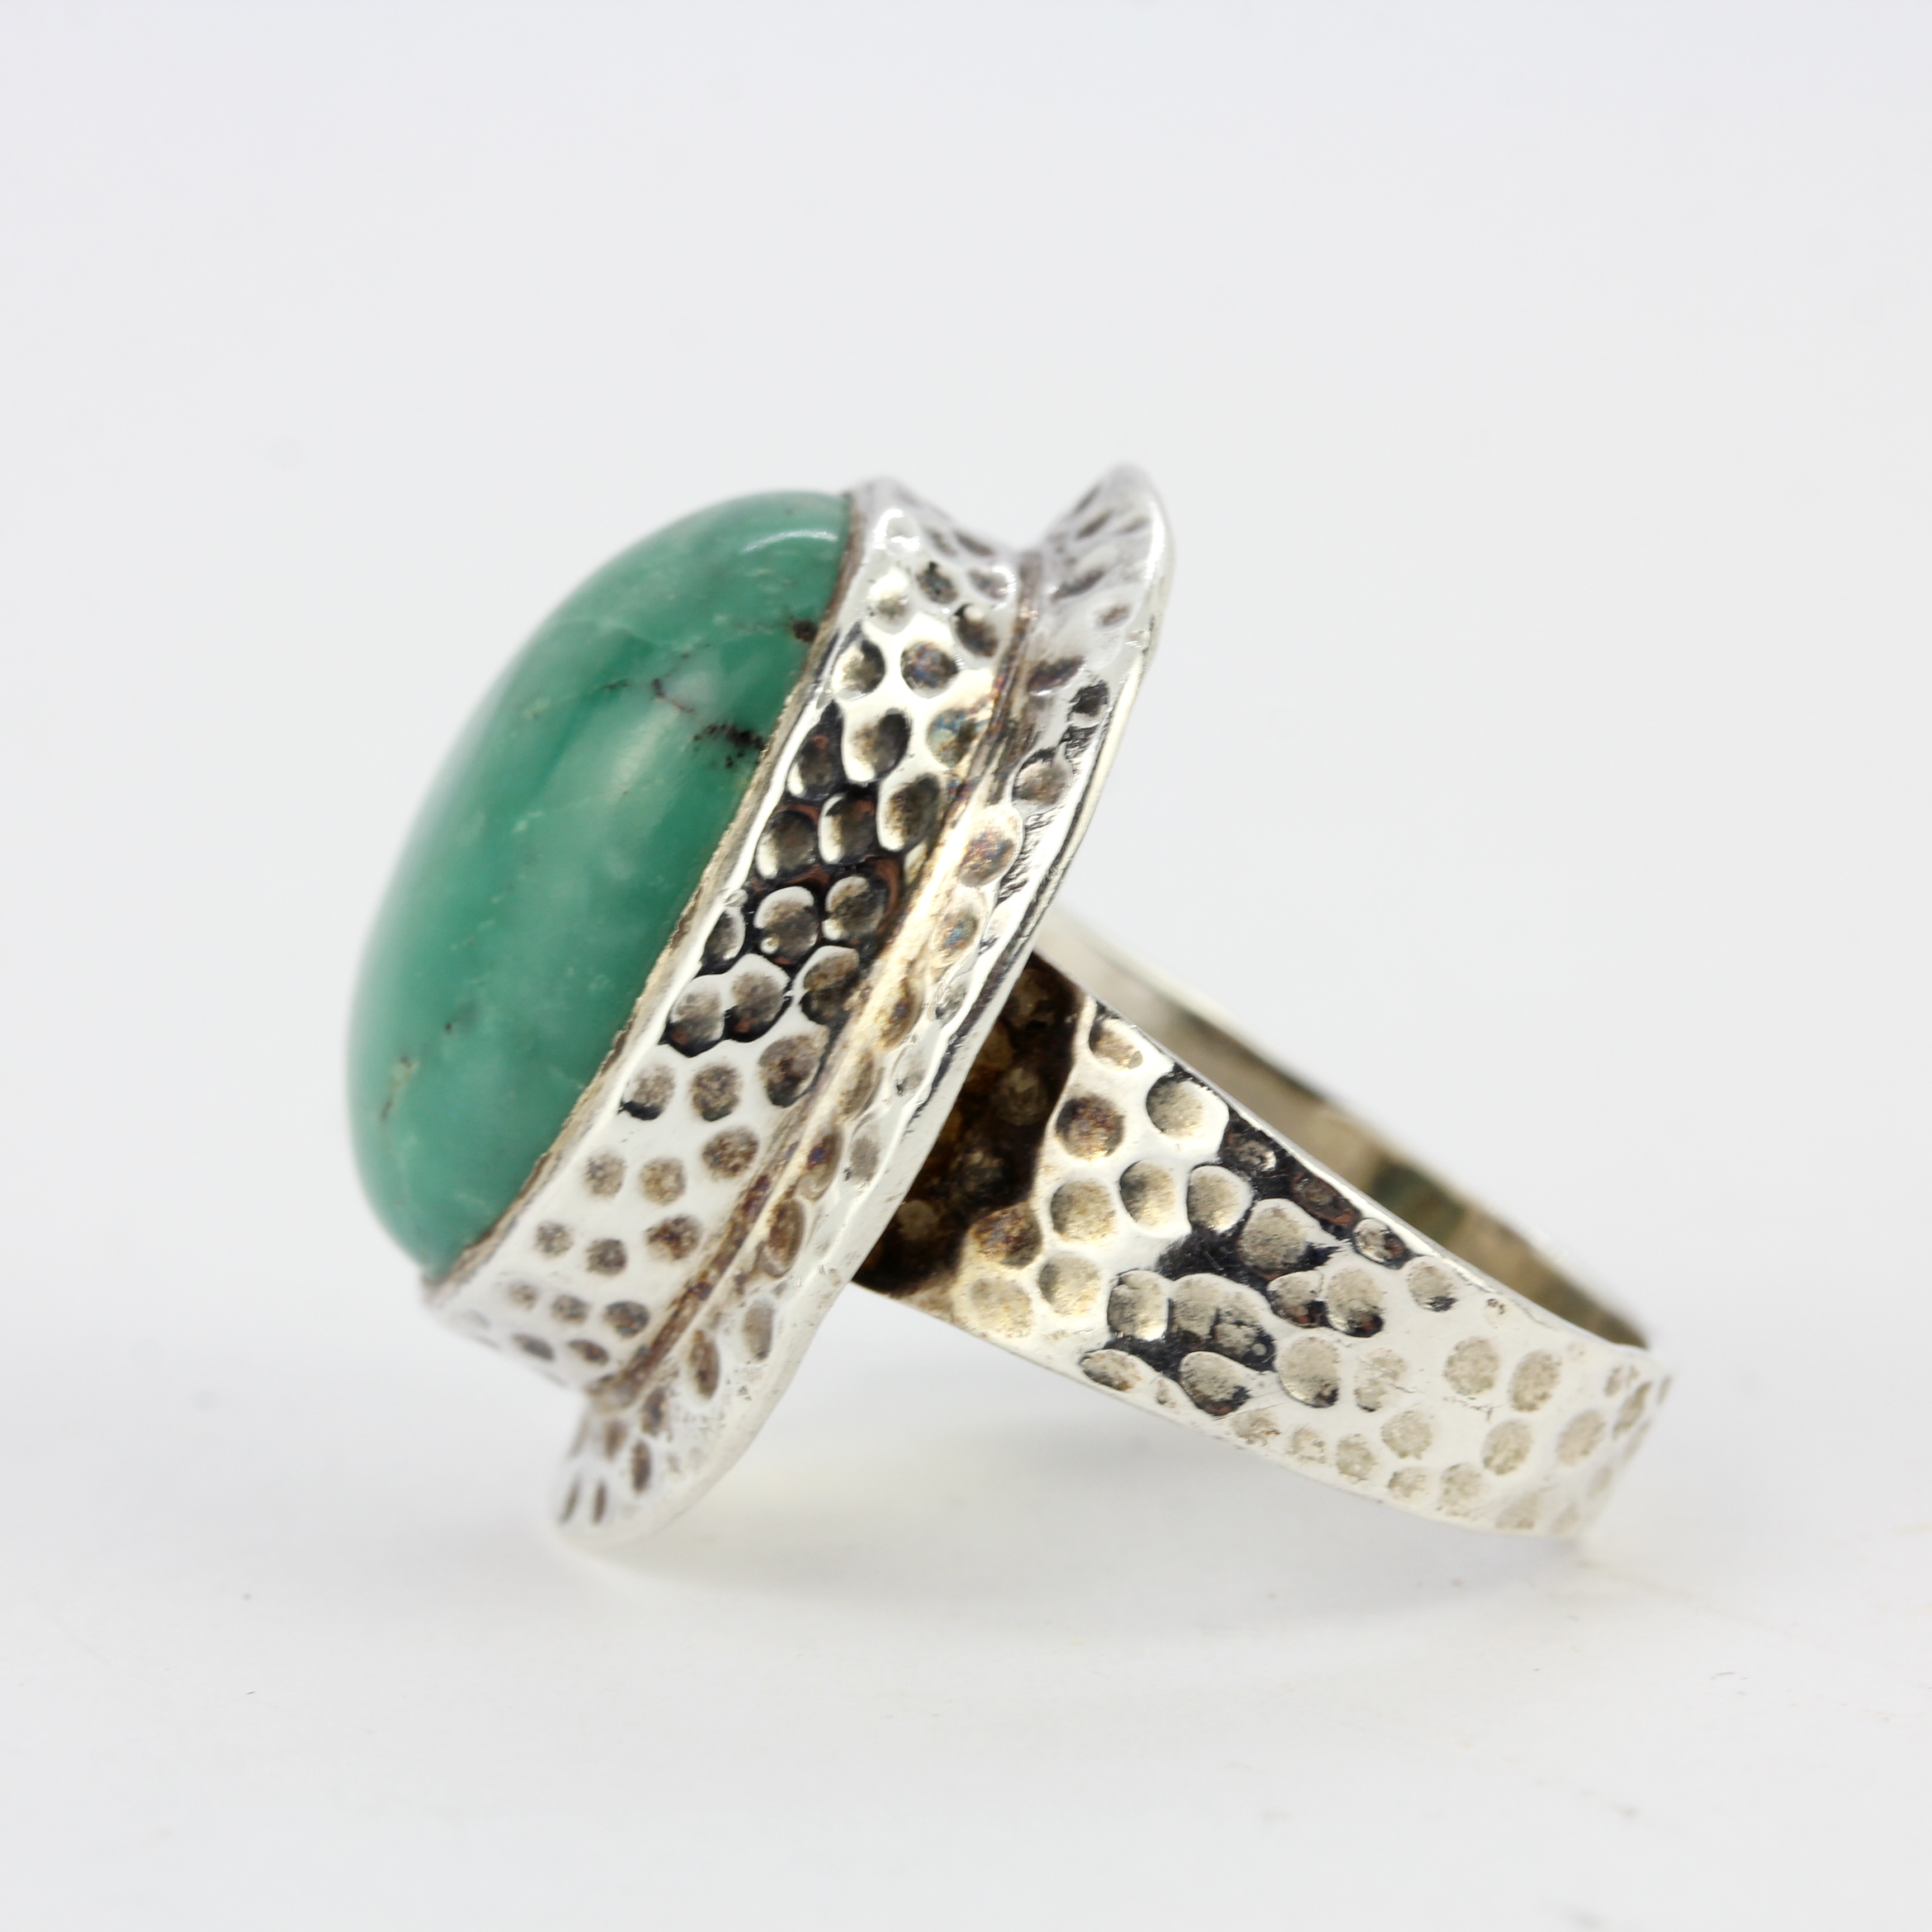 A 925 silver ring set with a large turquoise, ring size R.5. - Image 2 of 2